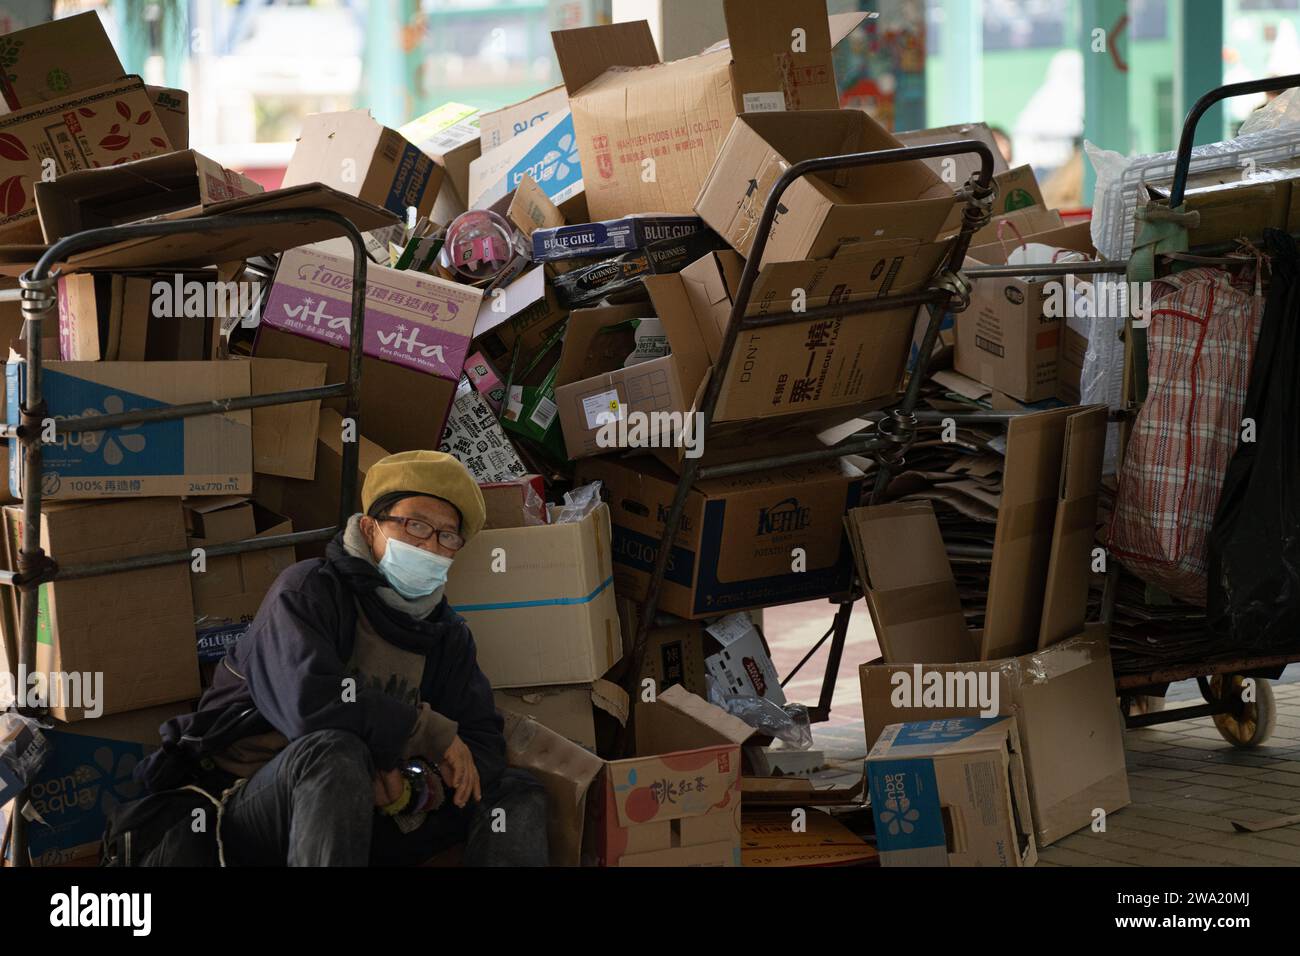 A man collects cardboard on a street in Hong Kong Stock Photo